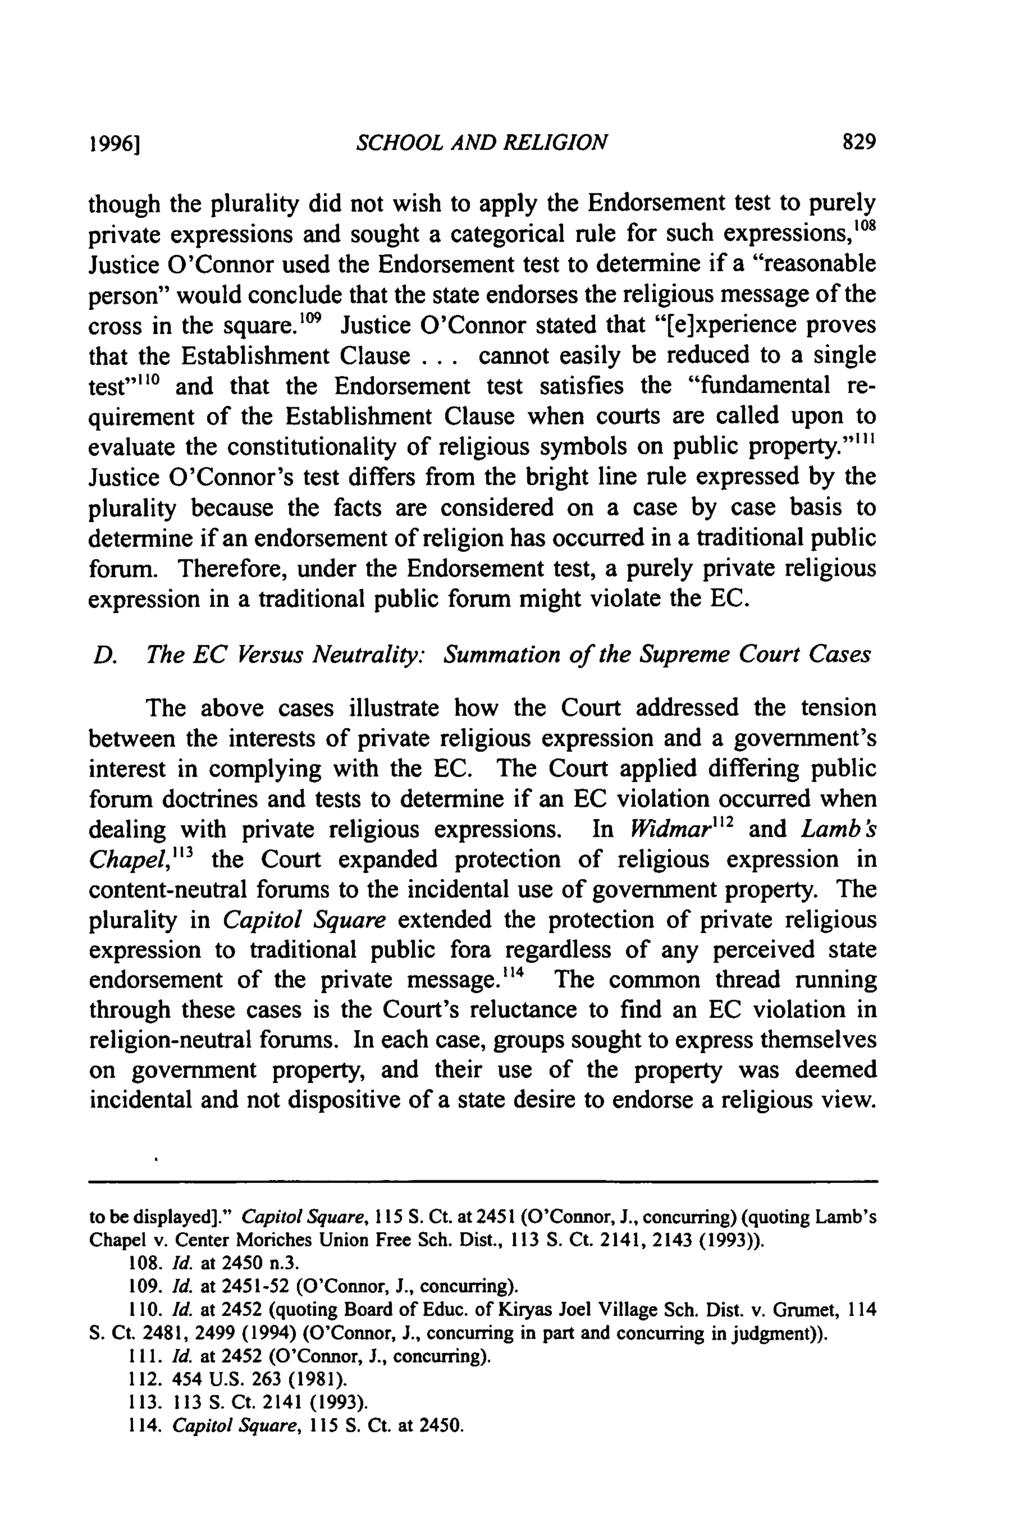 1996] SCHOOL AND RELIGION though the plurality did not wish to apply the Endorsement test to purely private expressions and sought a categorical rule for such expressions,' 0 8 Justice O'Connor used